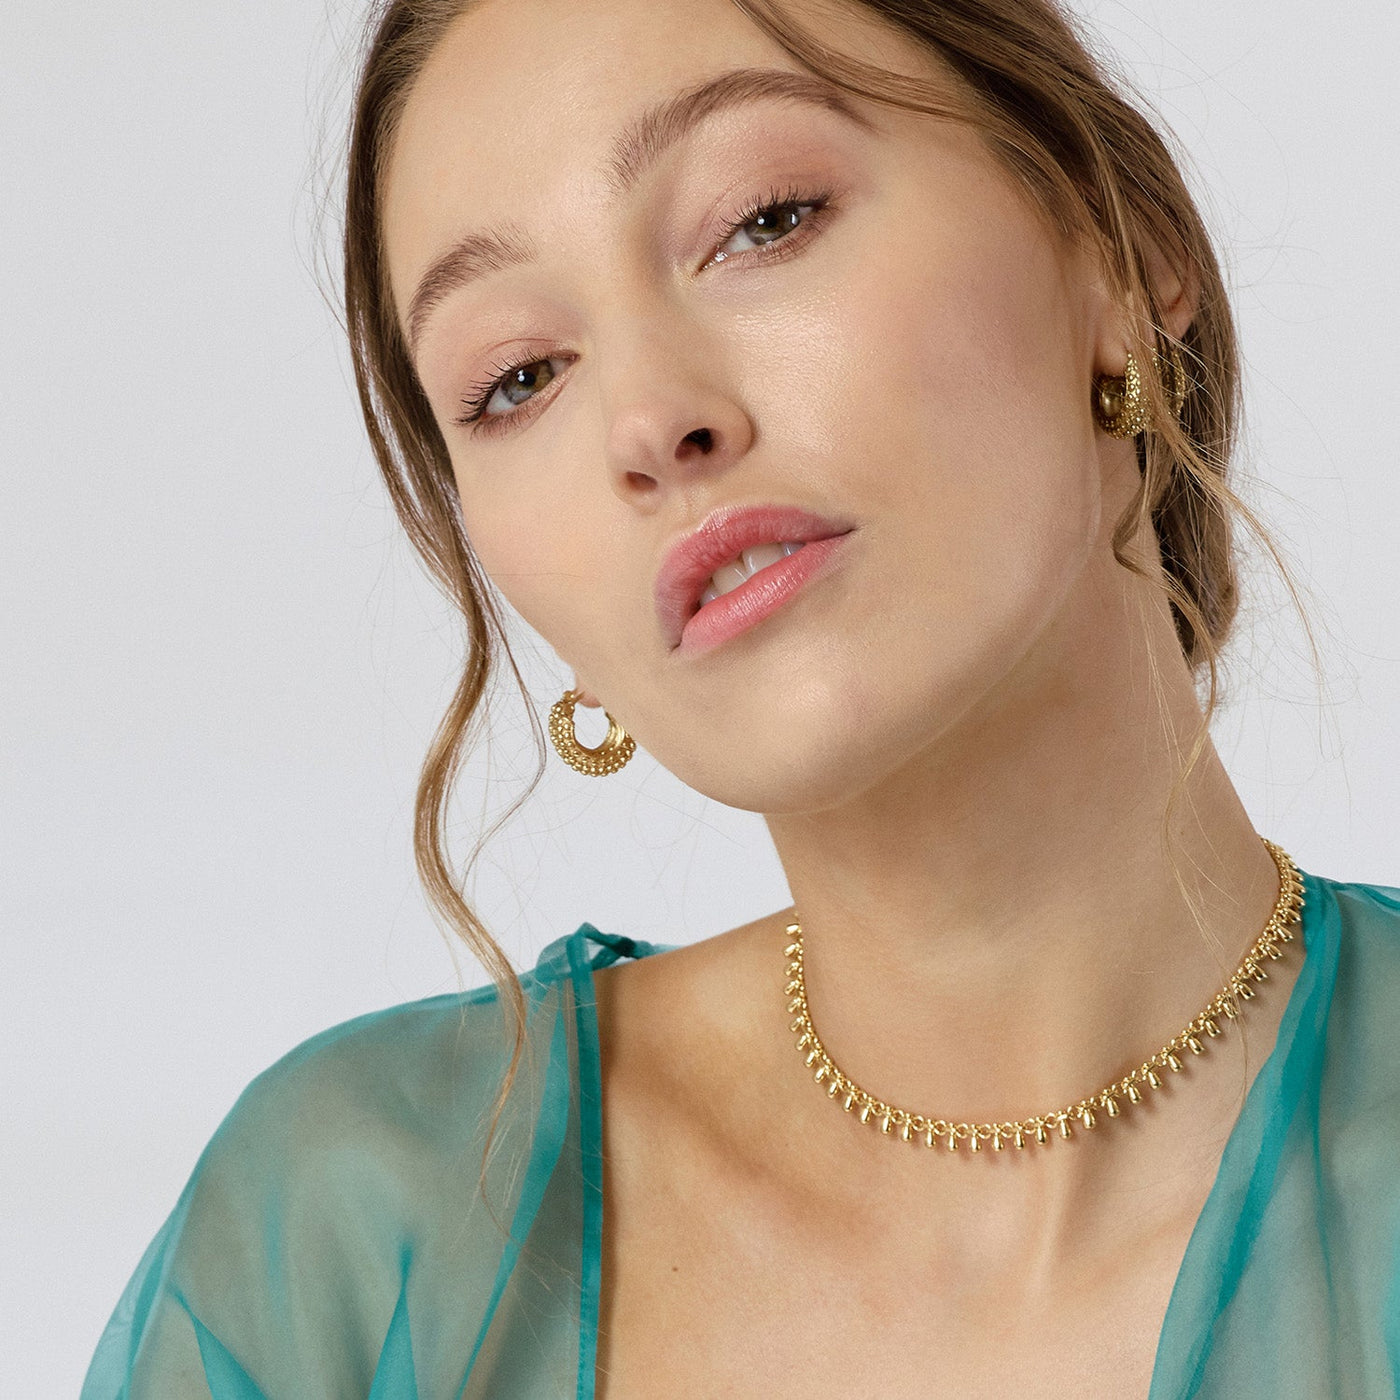 Katia Gold Chain Necklace with Teardrop Tassels